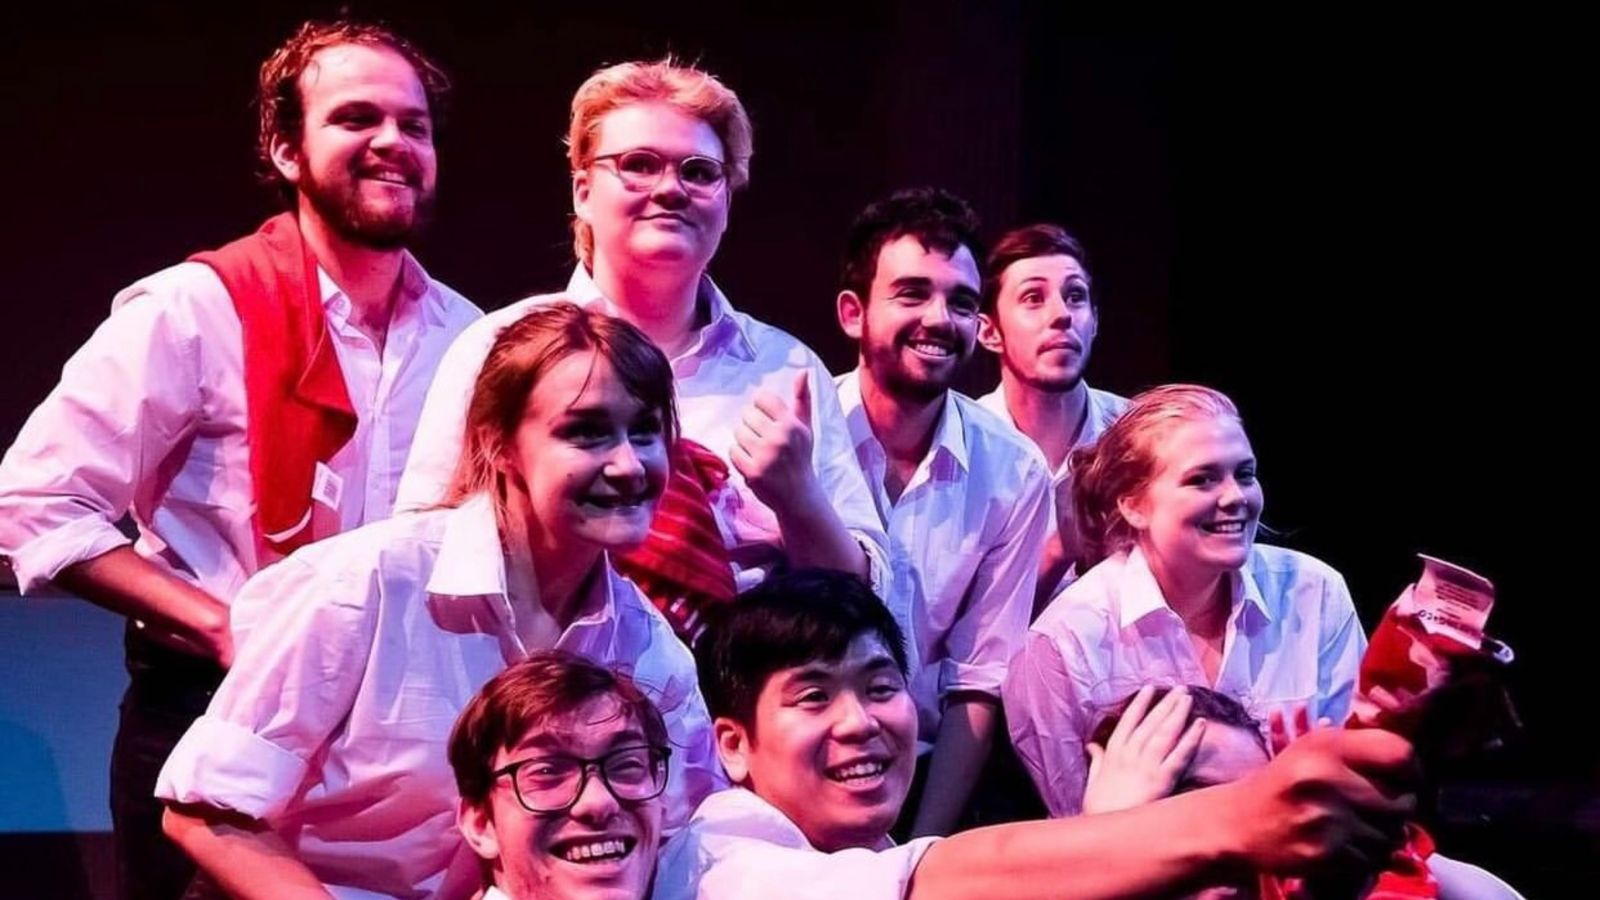 Eight actors on stage, wearing white shirts reflecting pink light, gathered together, facong the public and smiling.